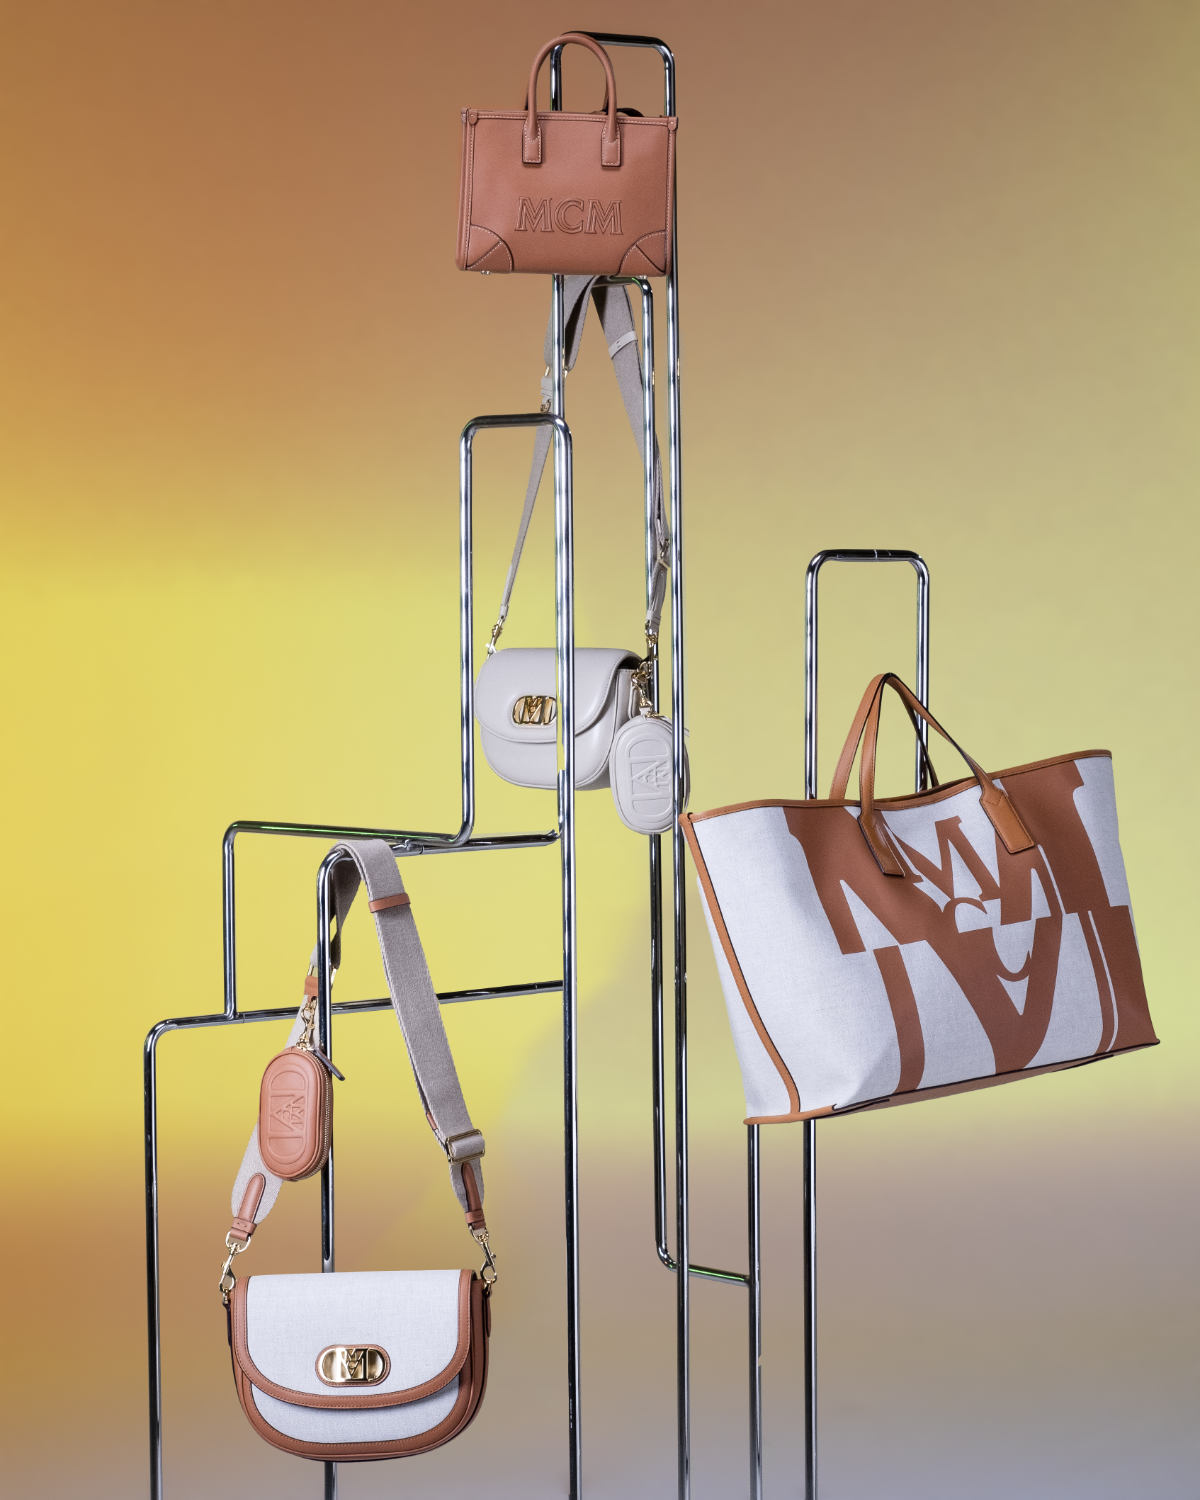 MCM Introduces Its New Autumn / Winter 2022 Collection: “Rebuild-Remake-Reform”